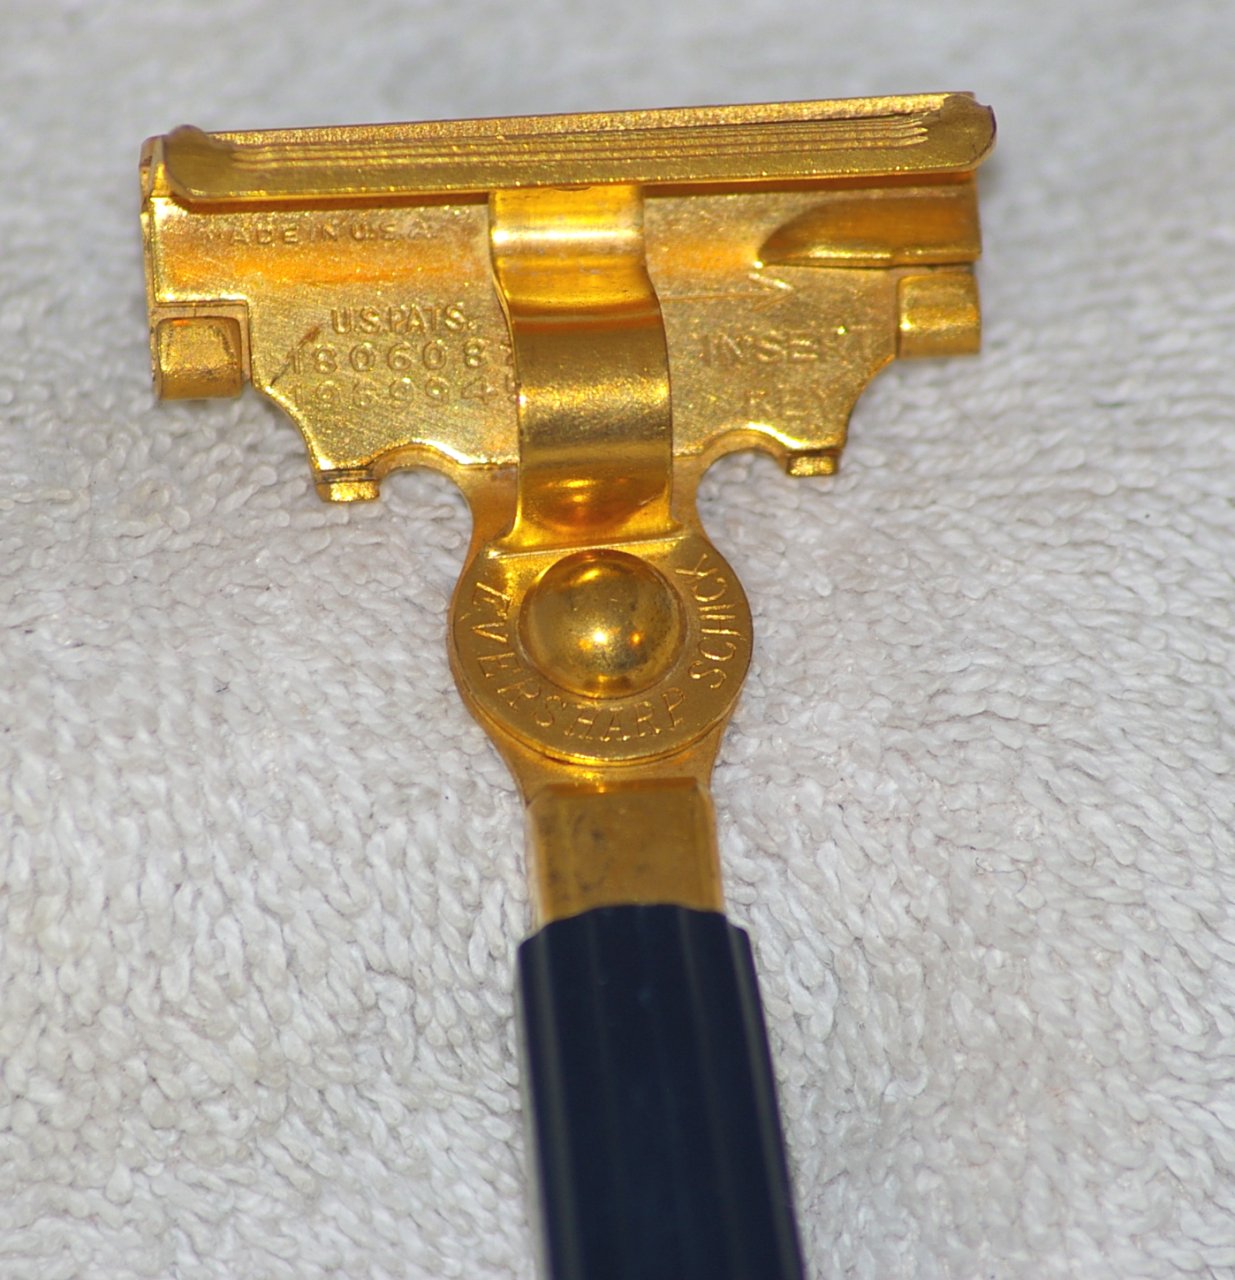 Schick Injector Razor, "Schick 66", Type G4 from 1949 - Click Image to Close